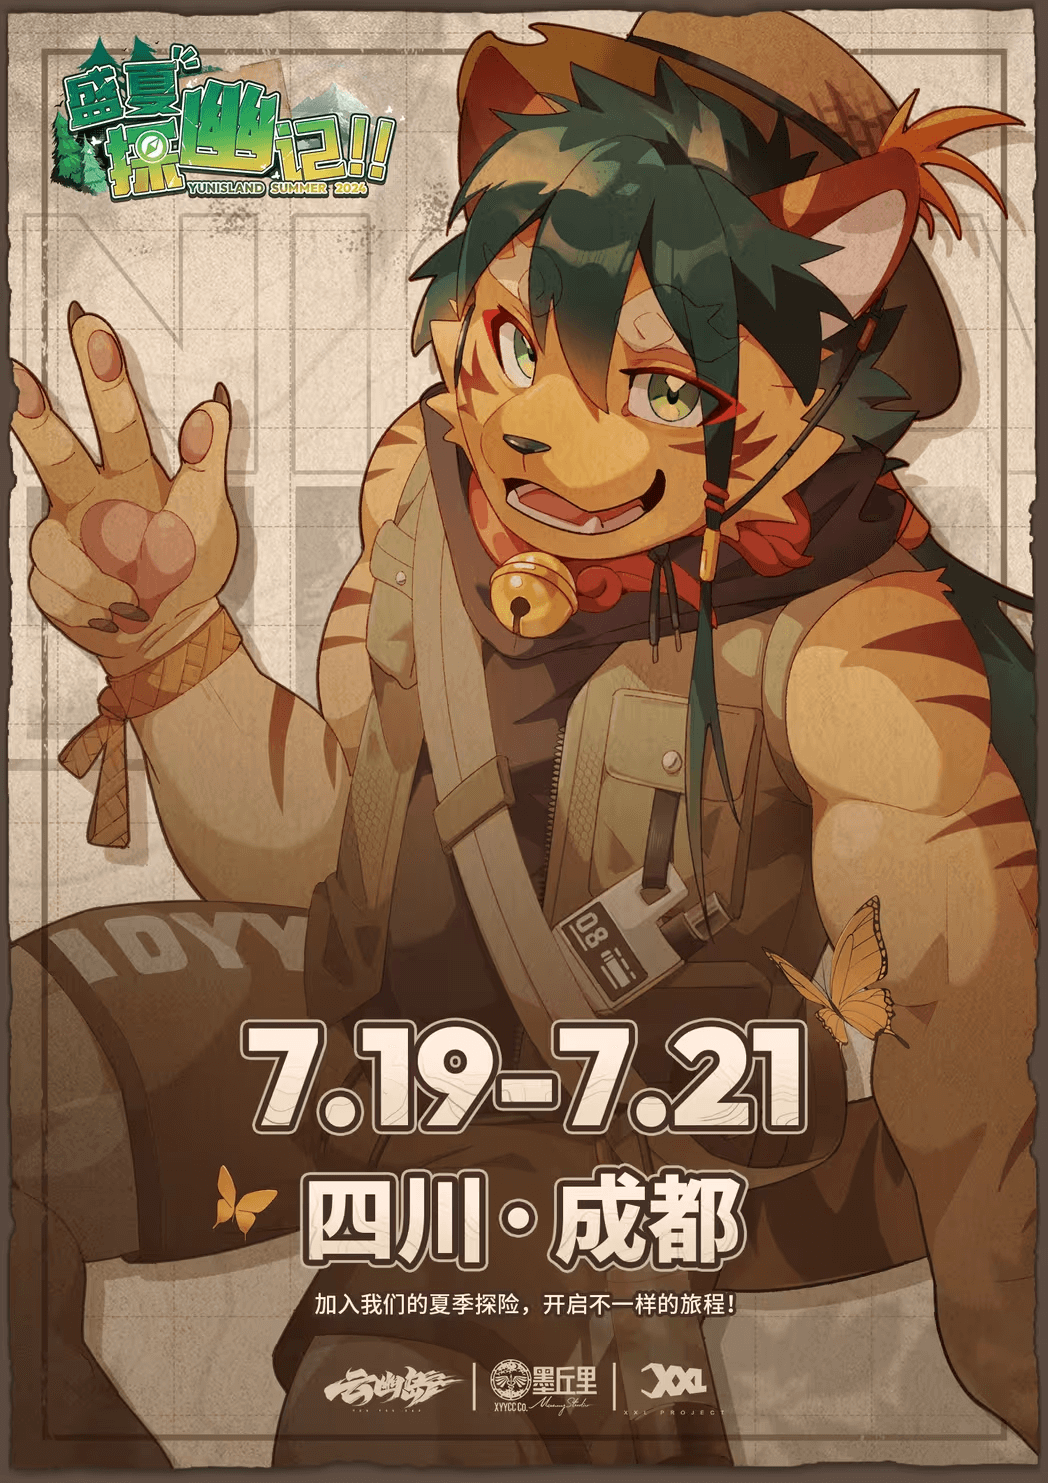 The event cover of 盛夏探幽记